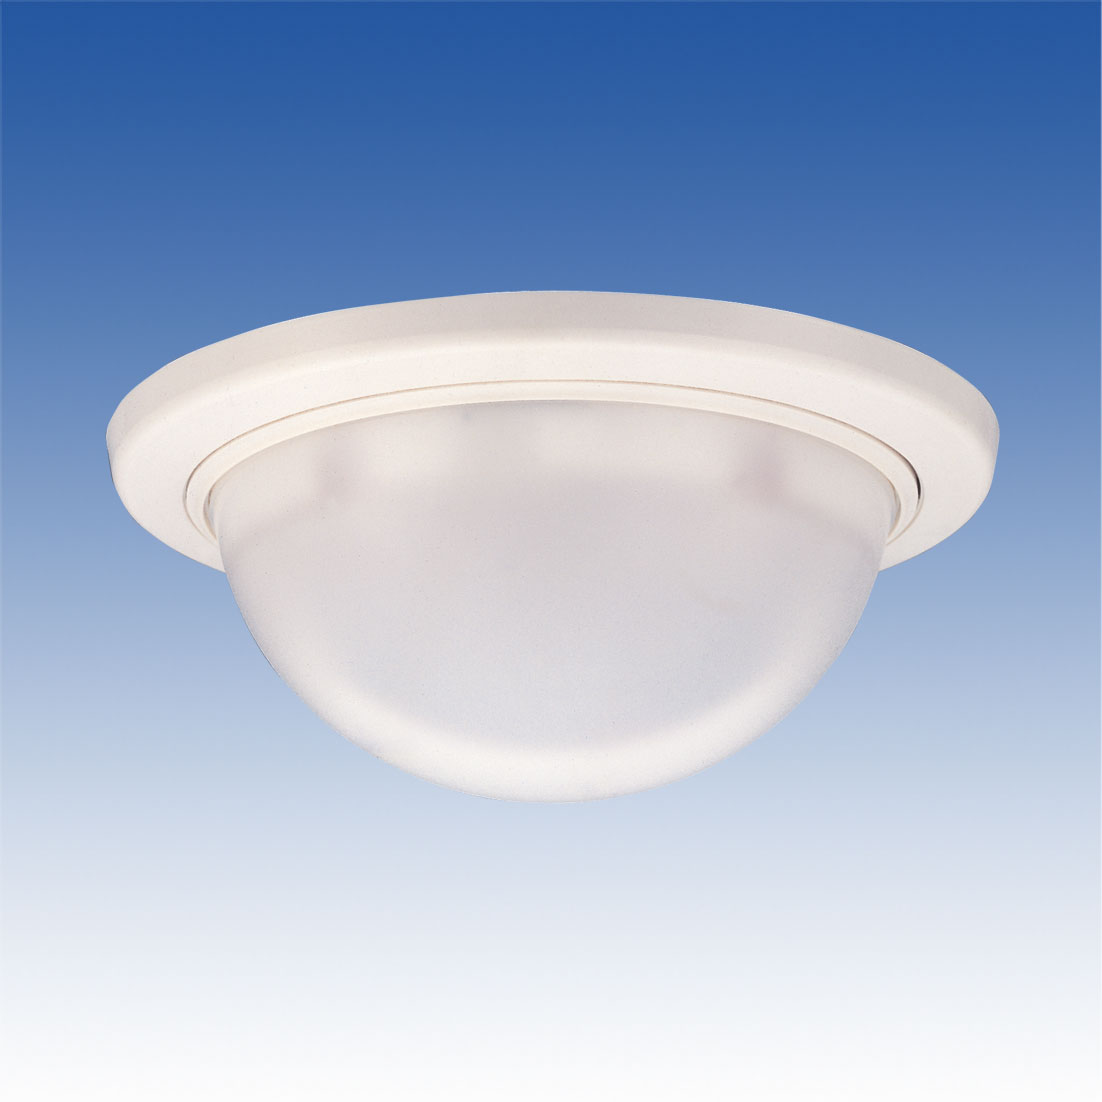 TAKEX HARDWIRED WIDE ANGLE PIR WHITE 12M DETECTION AREA 1 x SPST CONFIGURABLE OUTPUT (DRY) PLASTIC CEILING/WALL MOUNT UPTO 2.6M MOUNT HEIGHT 10.5-28VDC SNAP-IN SMALL DOME